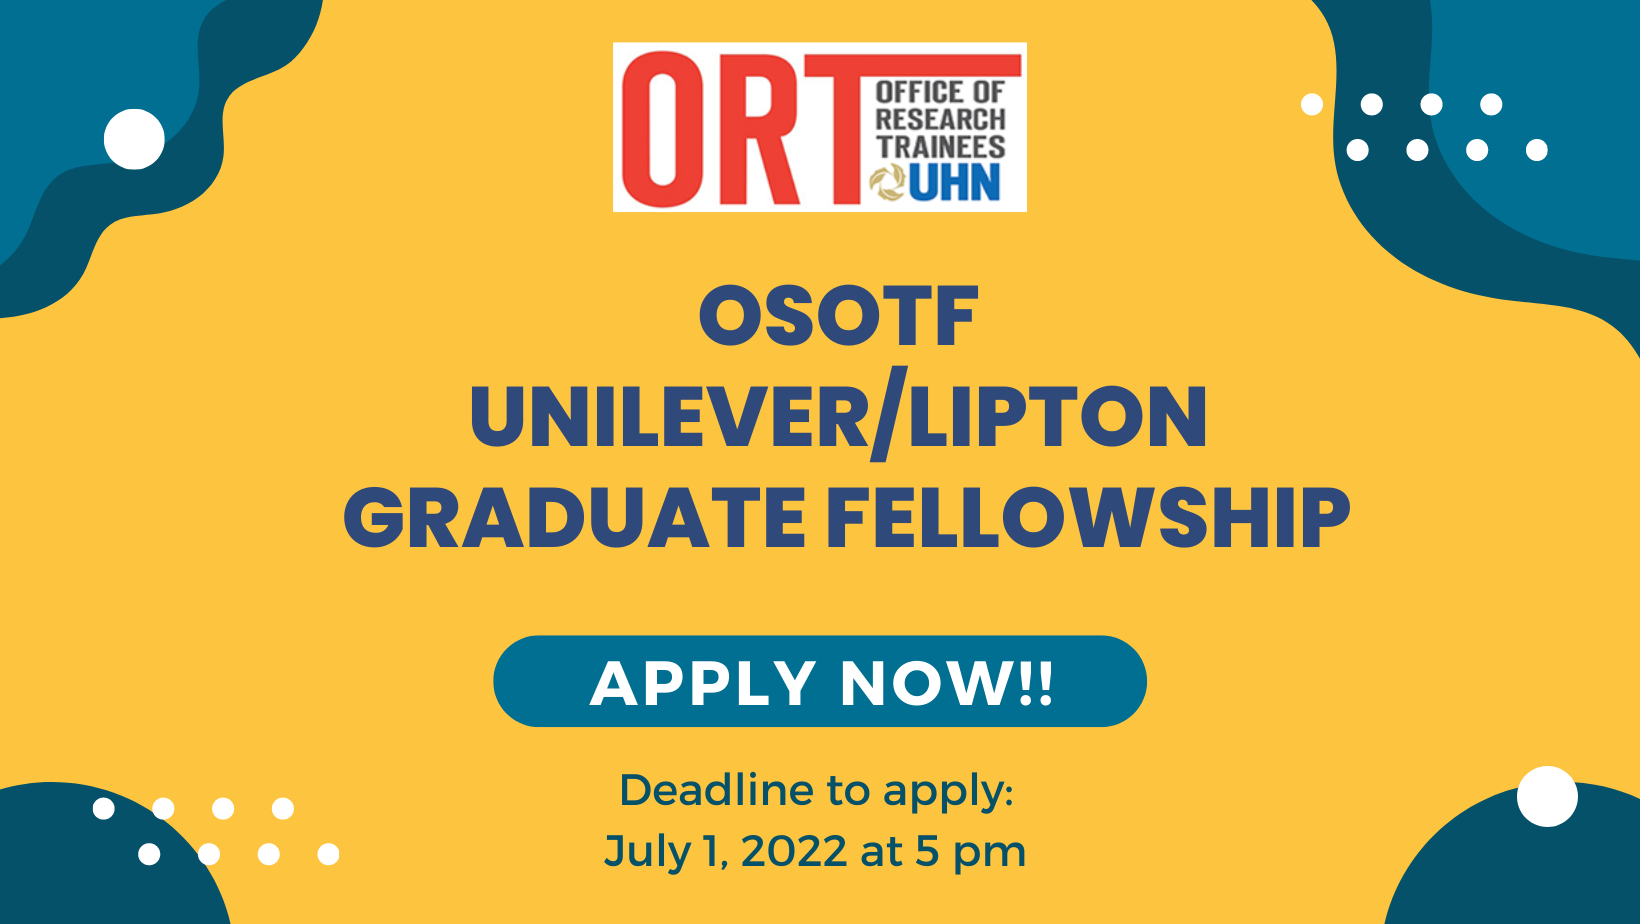 Yellow poster with blue shapes framing each corner. the ORT logo is in the top centre of the poster. Below it reads OSOTF Unilever/Lipton Graduate Fellowship. Apply Now!! Deadline to apply: July 1, 2022 at 5 pm